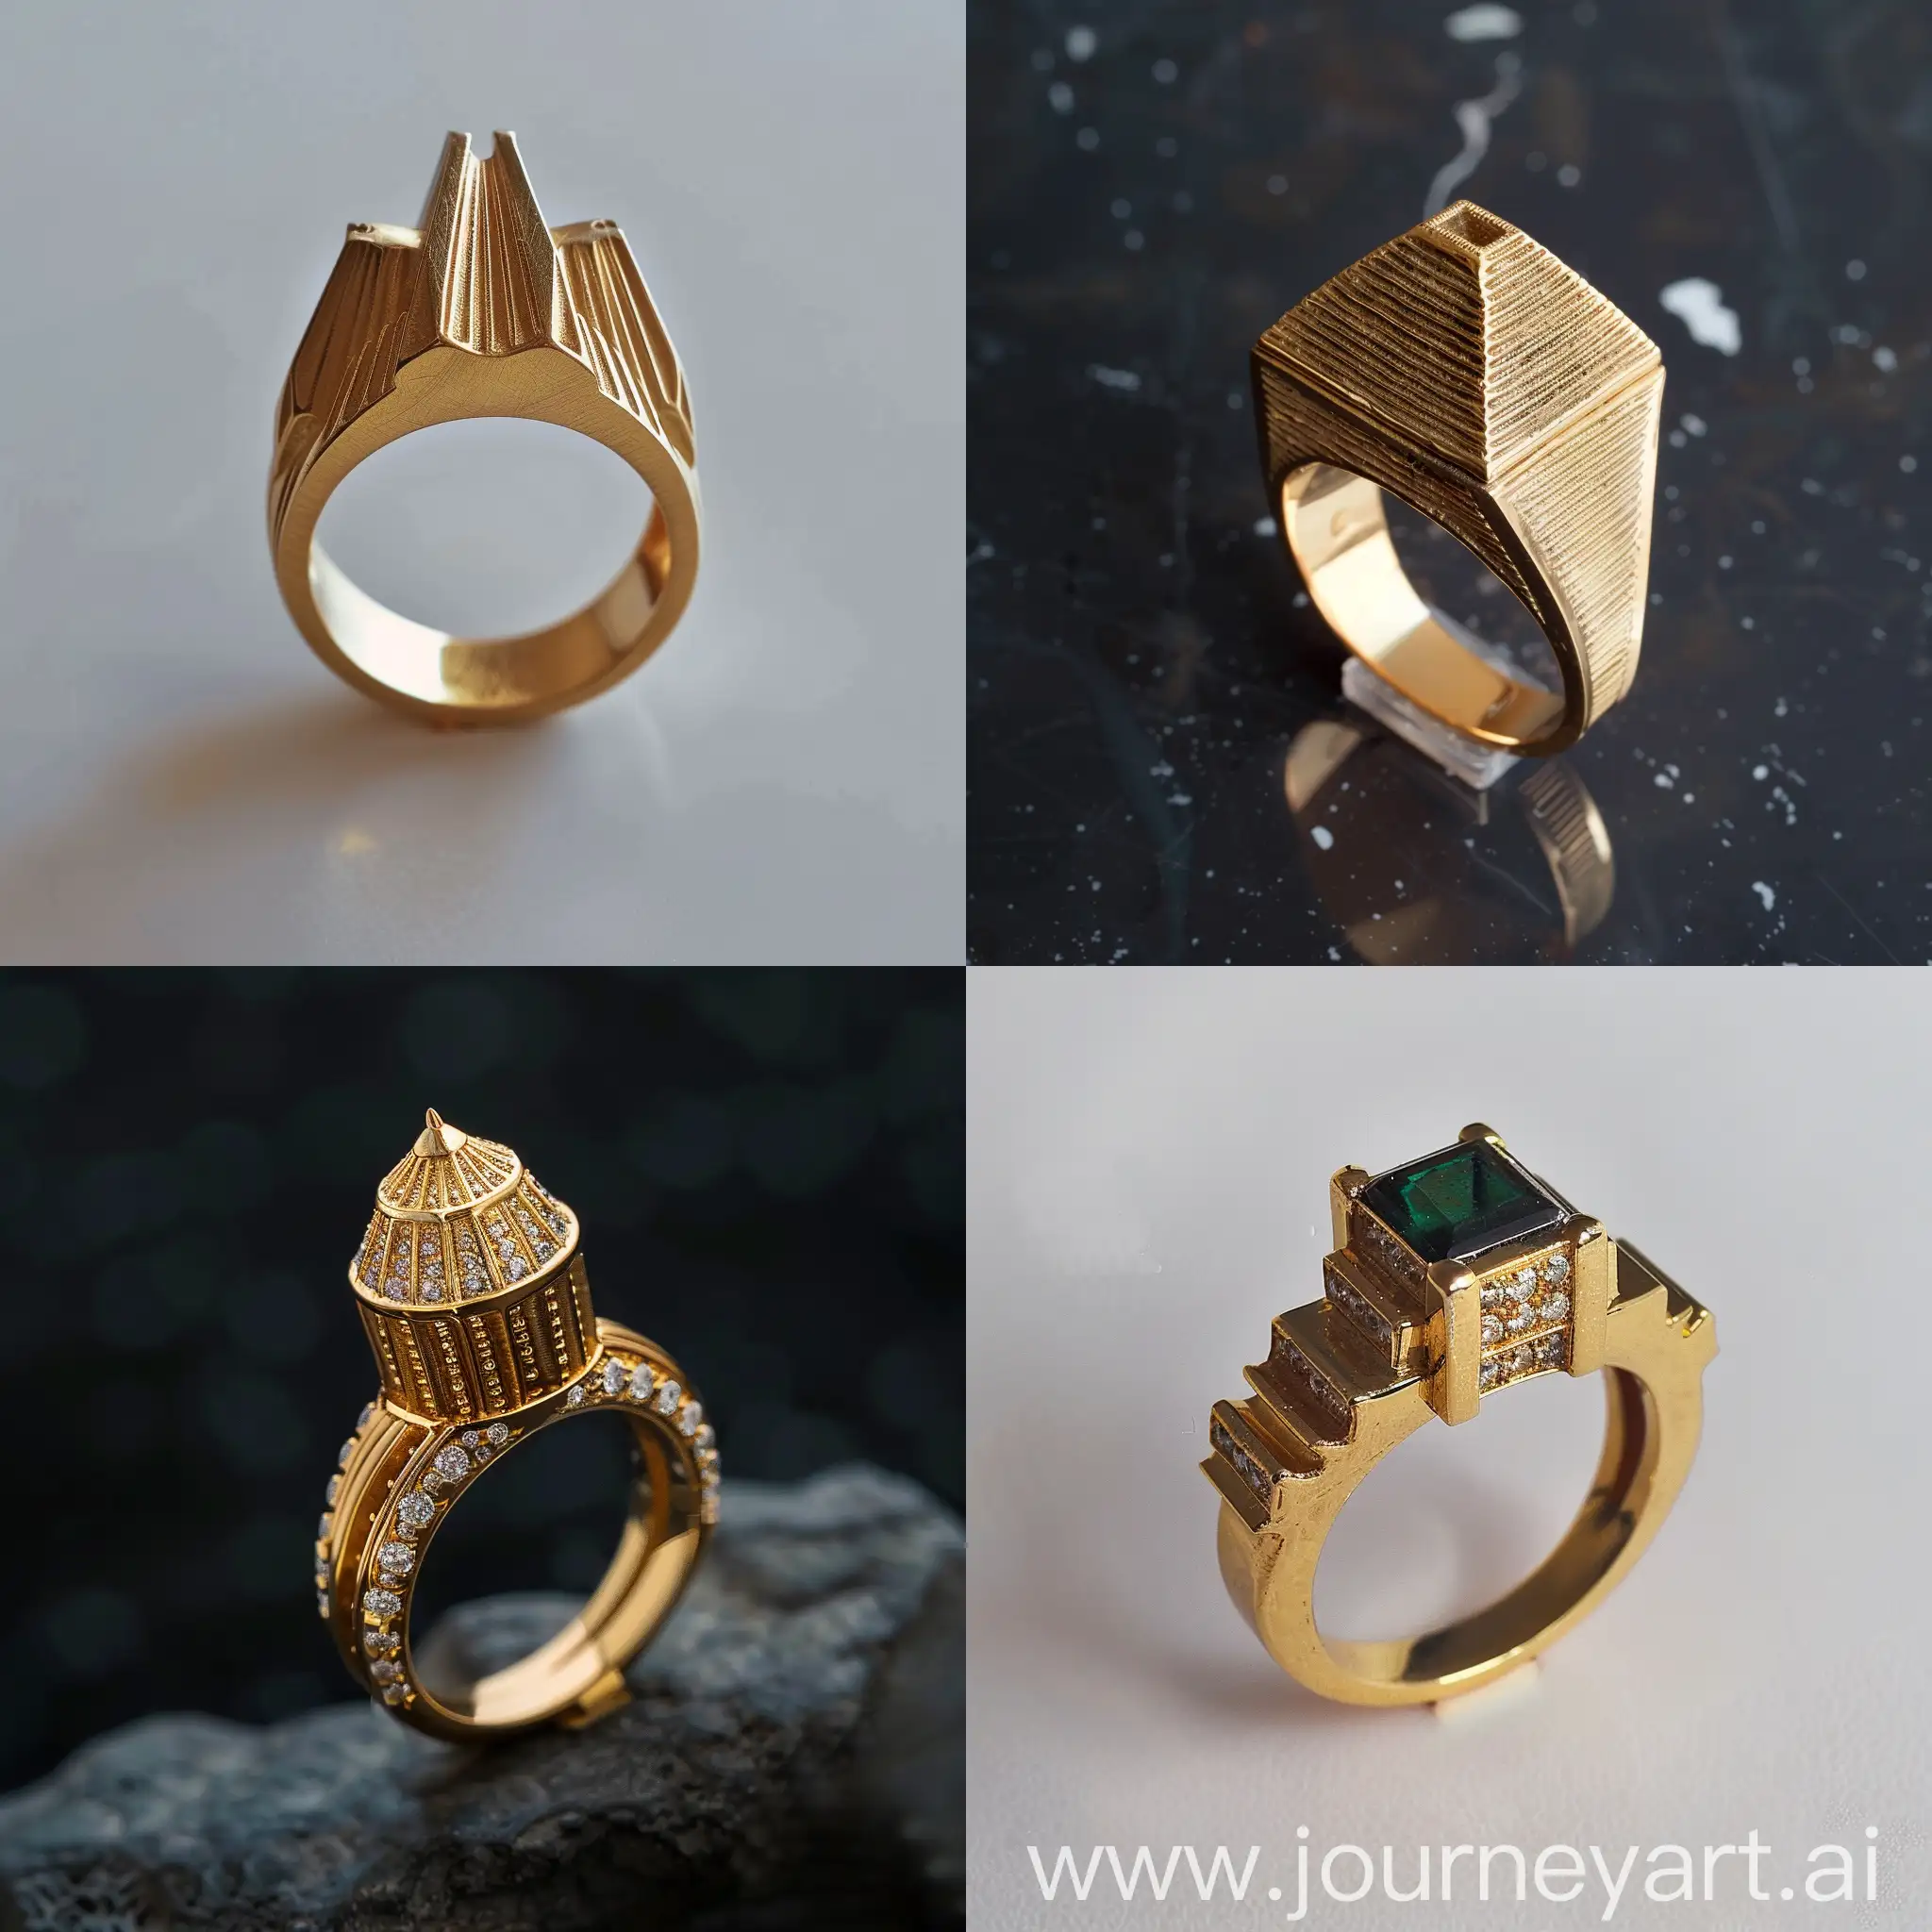 A ring inspired by Milad Tower in Tehran